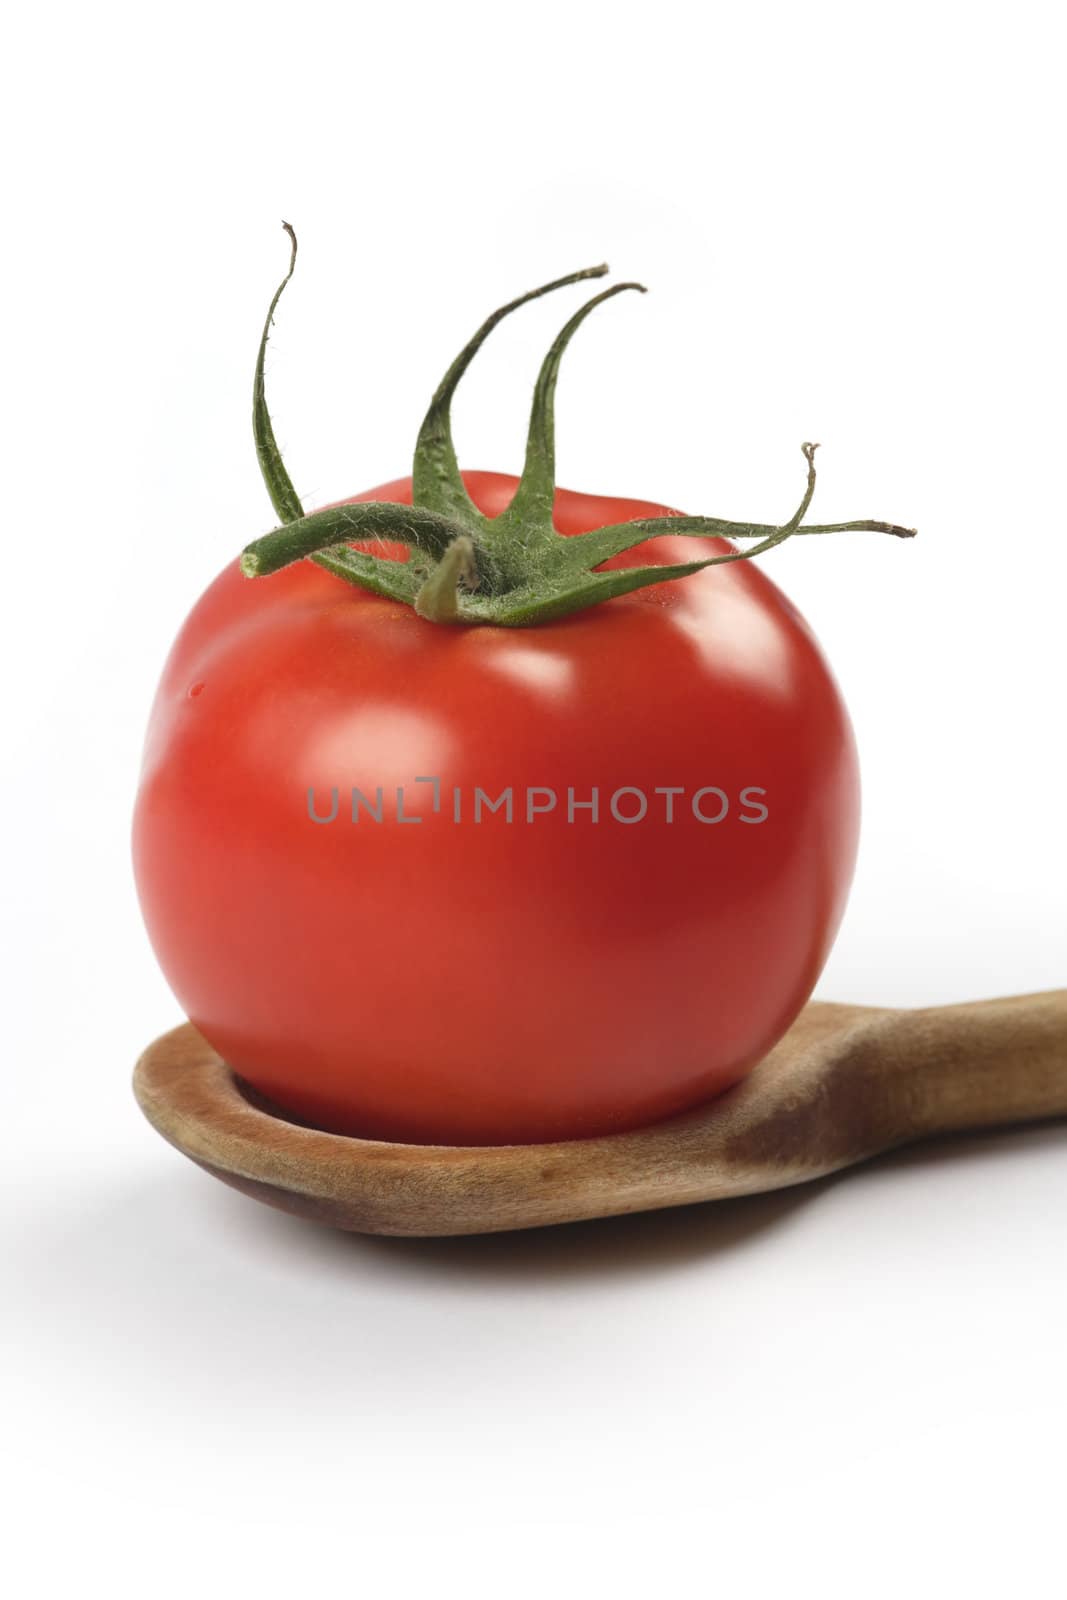 Single tomato sitting in an old wooden spoon.